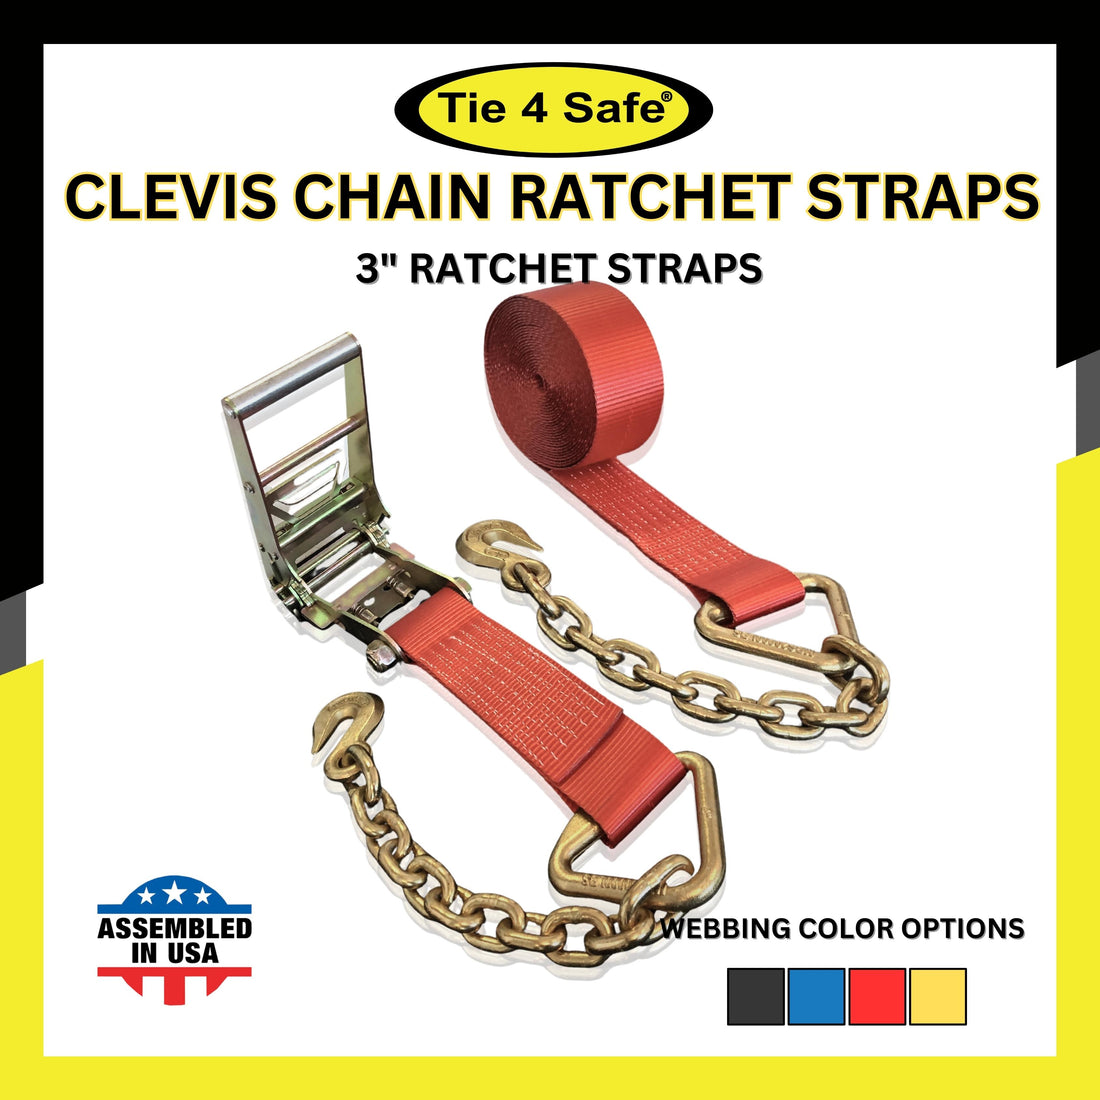 3" Ratchet Straps with Chain Extension